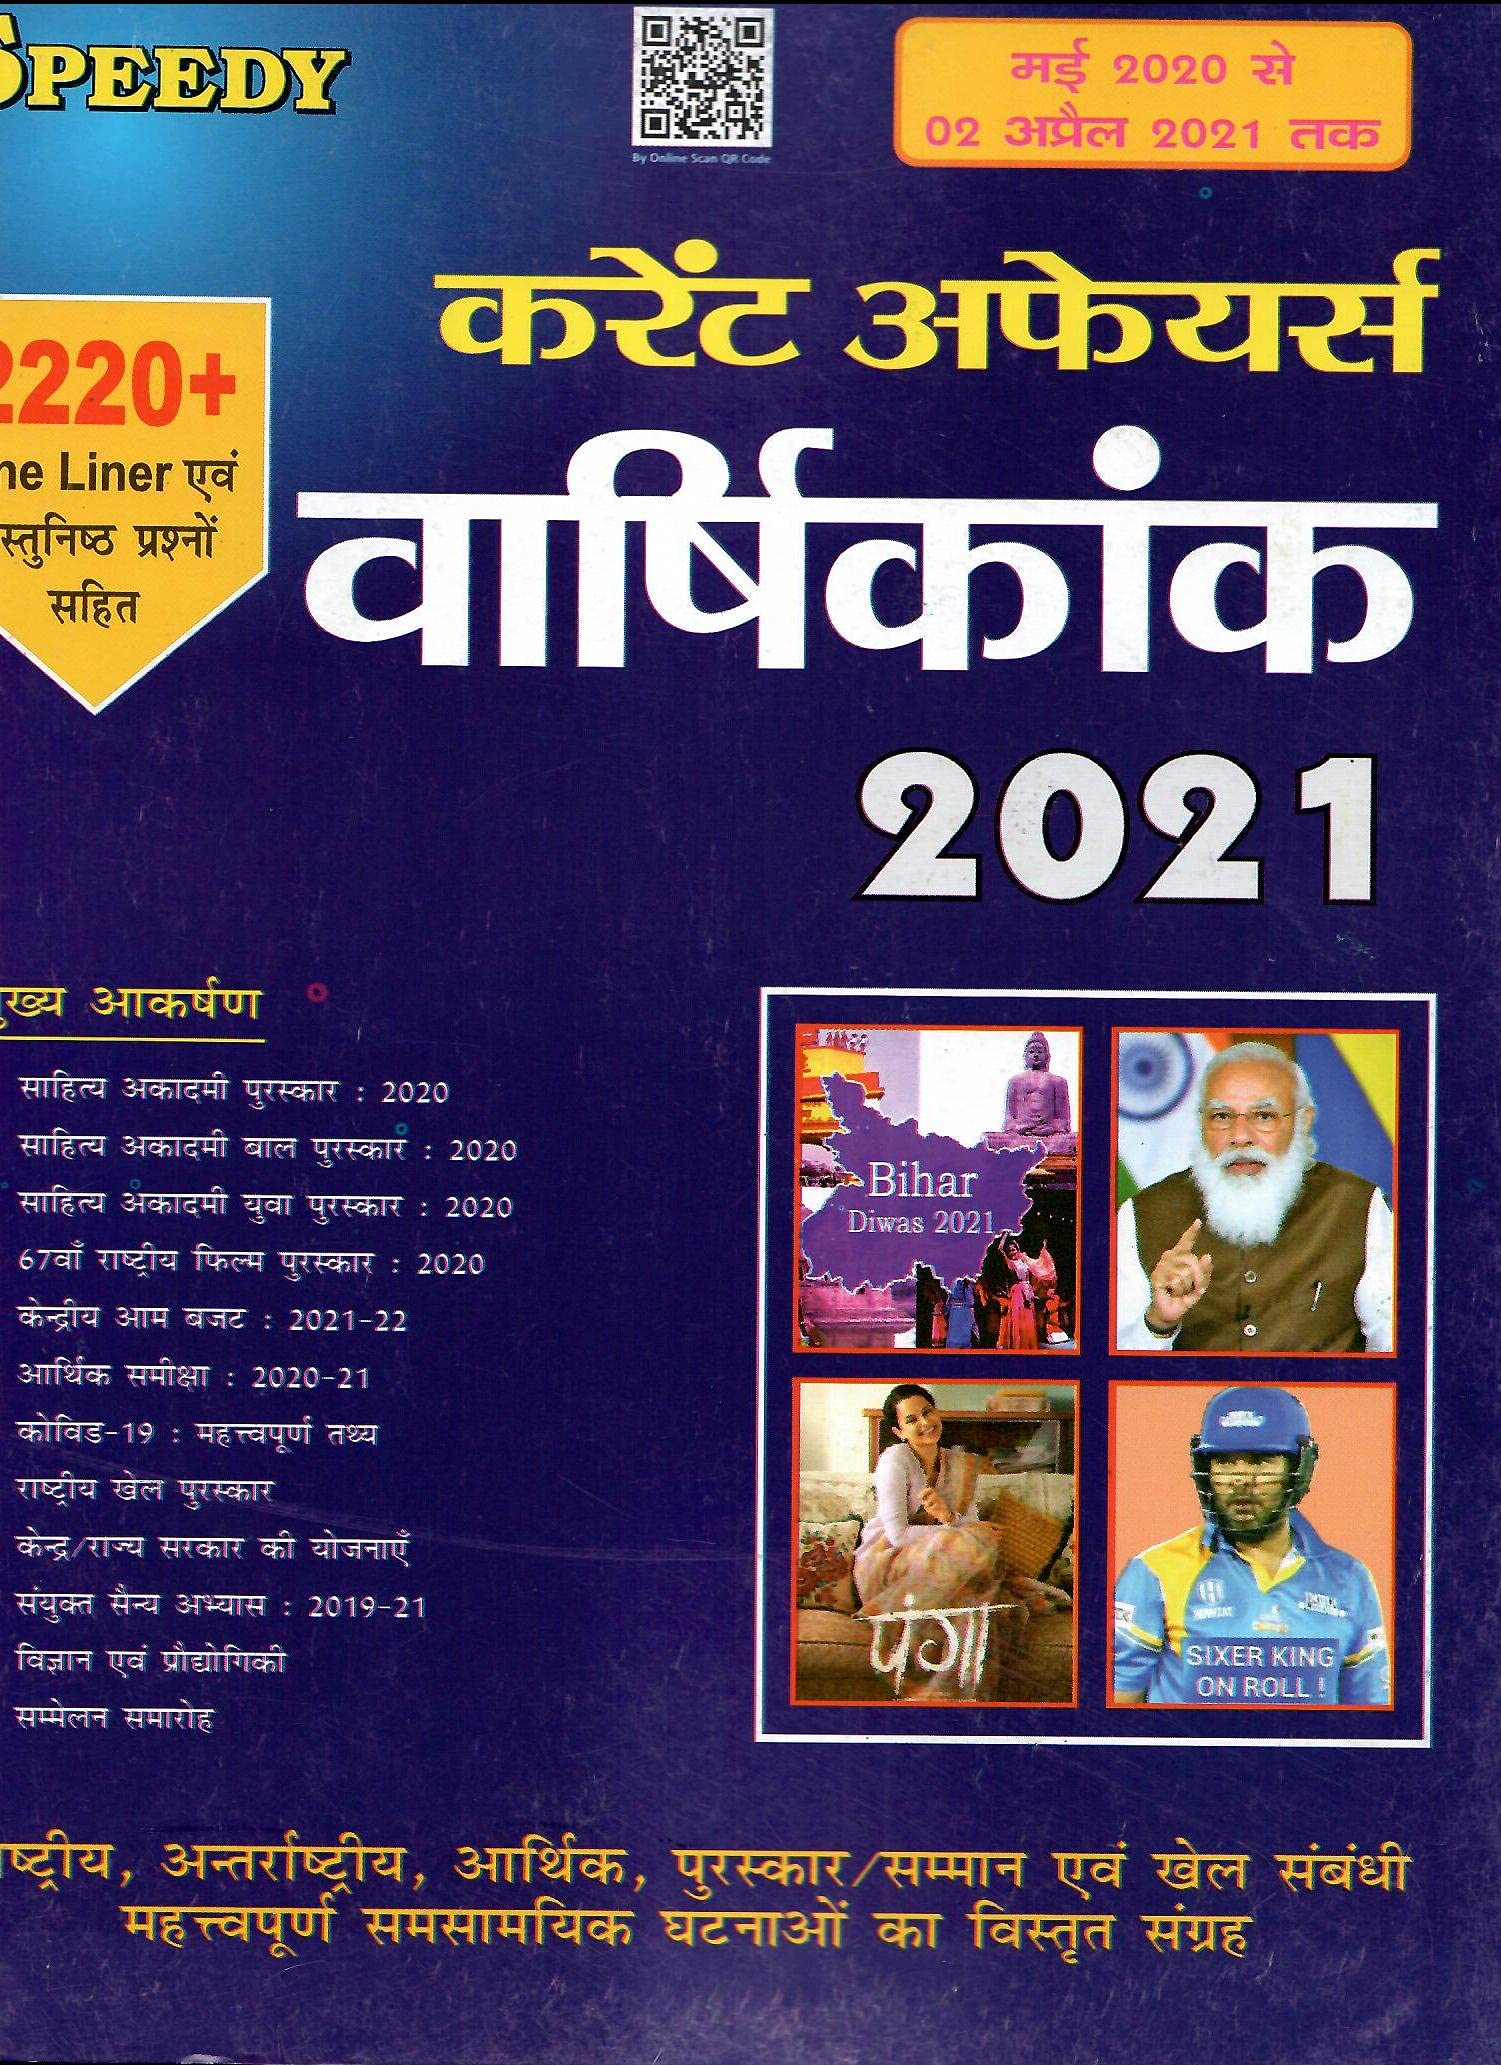 Pdf Speedy Current Affairs Hindi April 2021 Latest Release All Important Events Covered 3633